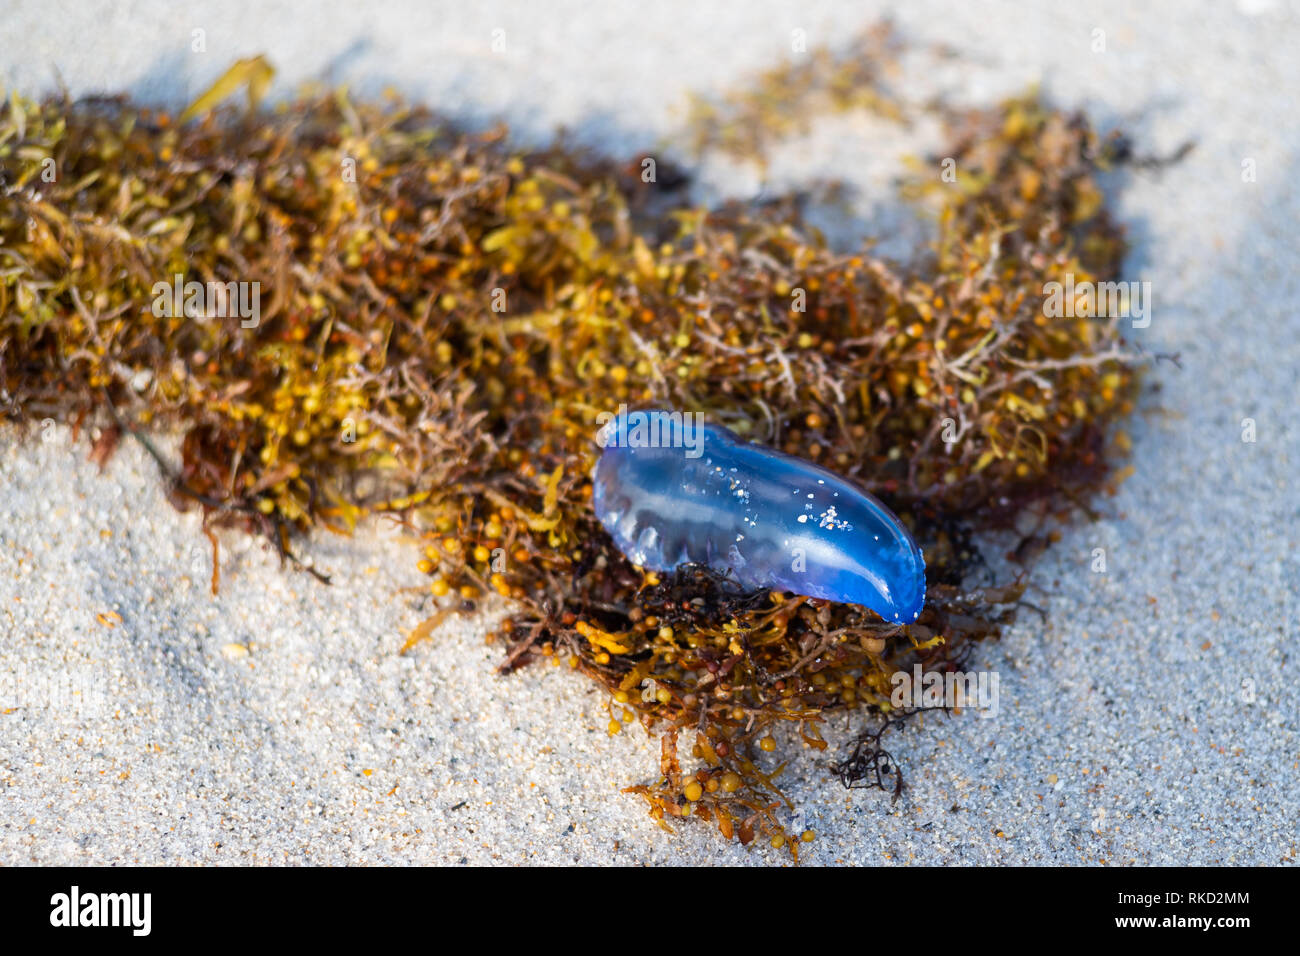 Portuguese man of war jellyfish stranded on Miami Beach, also called blue-bottle in Australia. Stock Photo